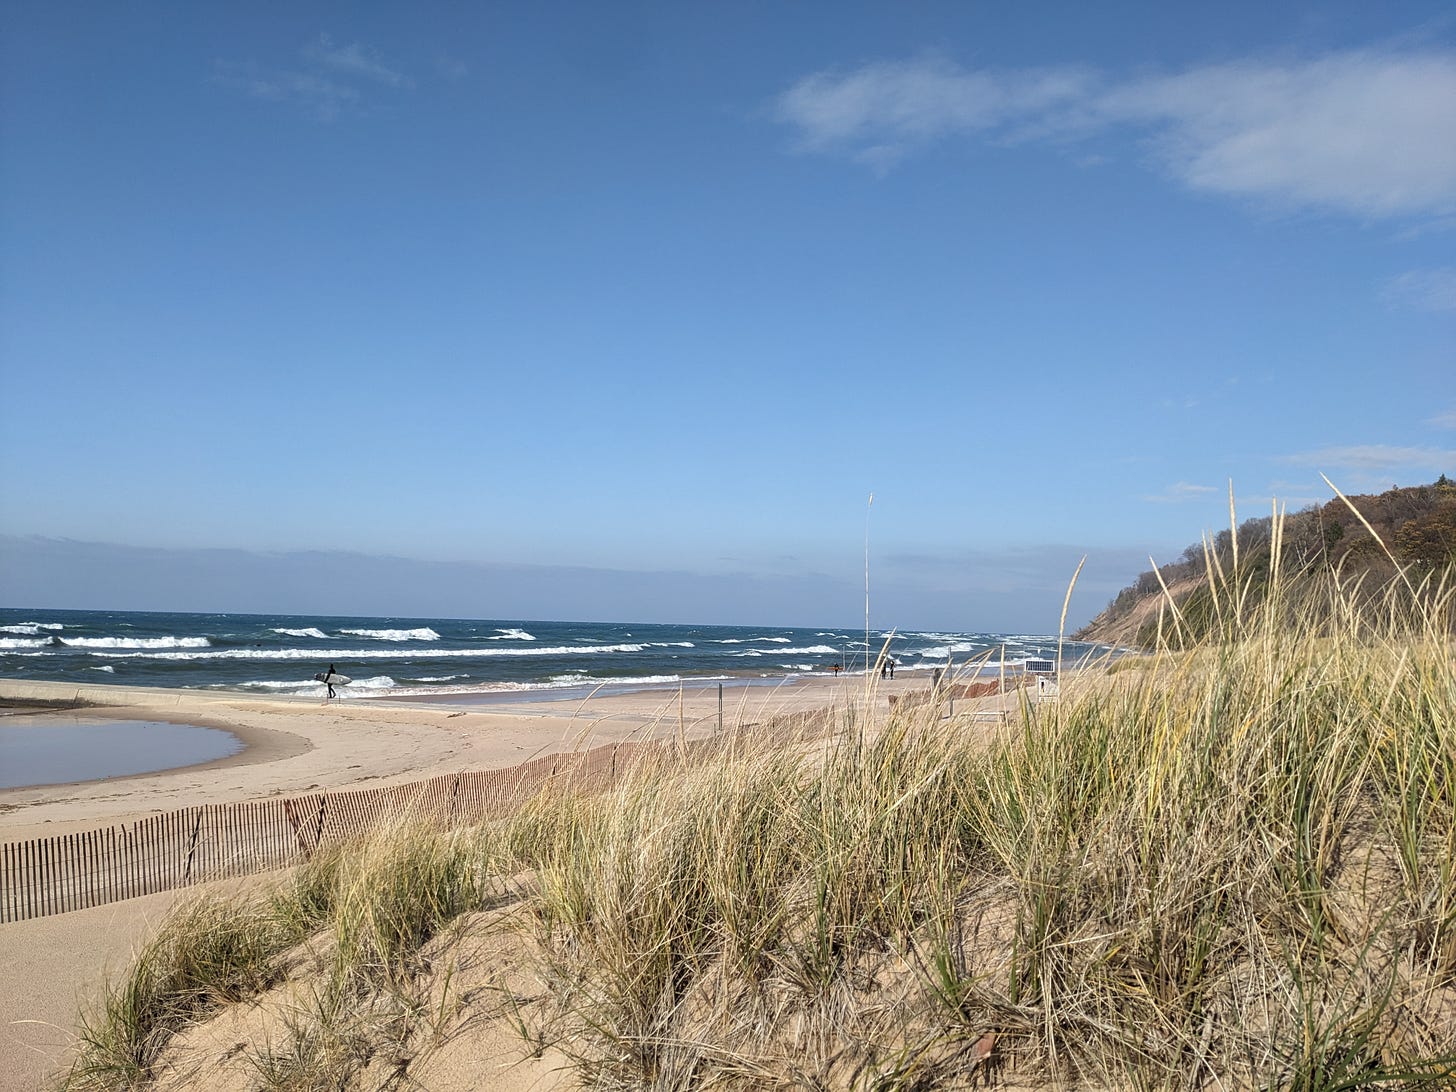 The Lake Michigan shoreline, with dune grass in the foreground and dark blue water in the distance. There are whitecaps on the lake, and surfers are walking toward the water.